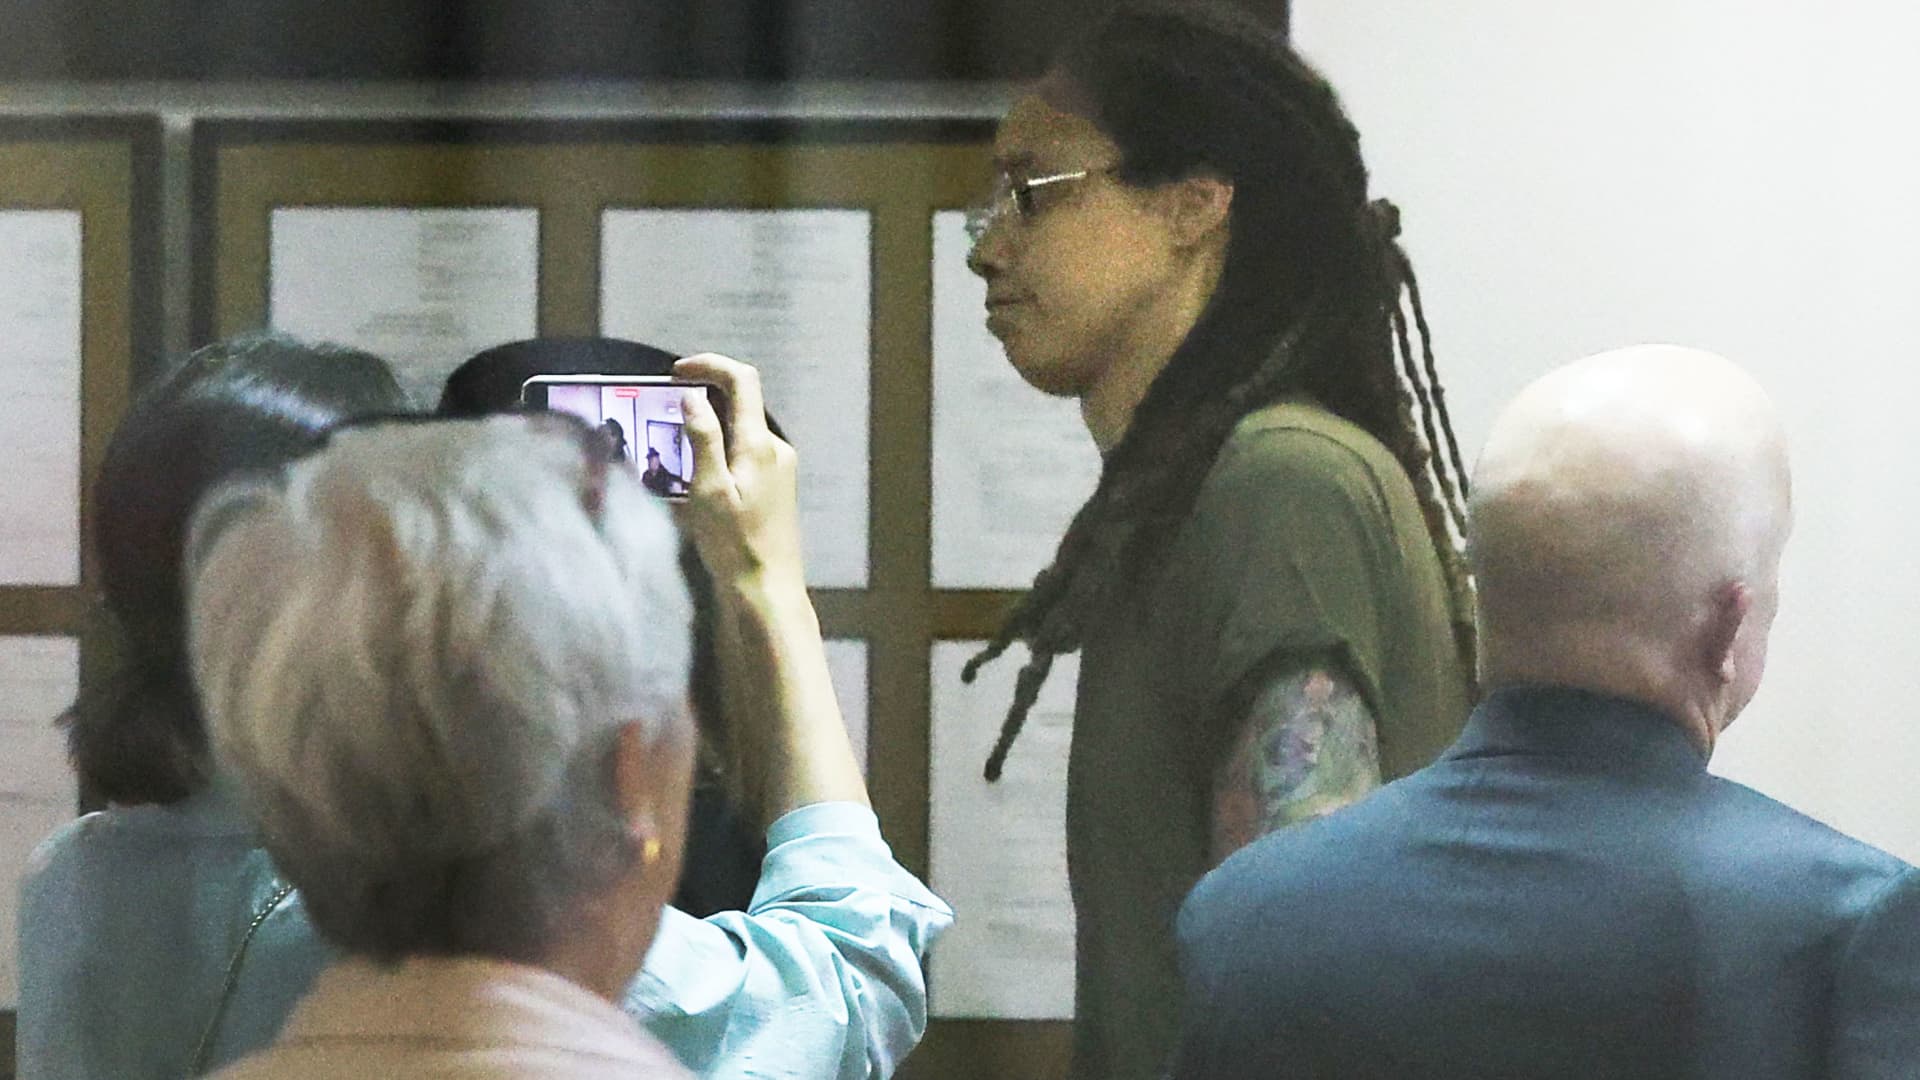 U.S. basketball player Brittney Griner, who was detained in March at Moscow's Sheremetyevo airport and later charged with illegal possession of cannabis, is escorted before a court hearing in Khimki outside Moscow, Russia, July, 14, 2022.